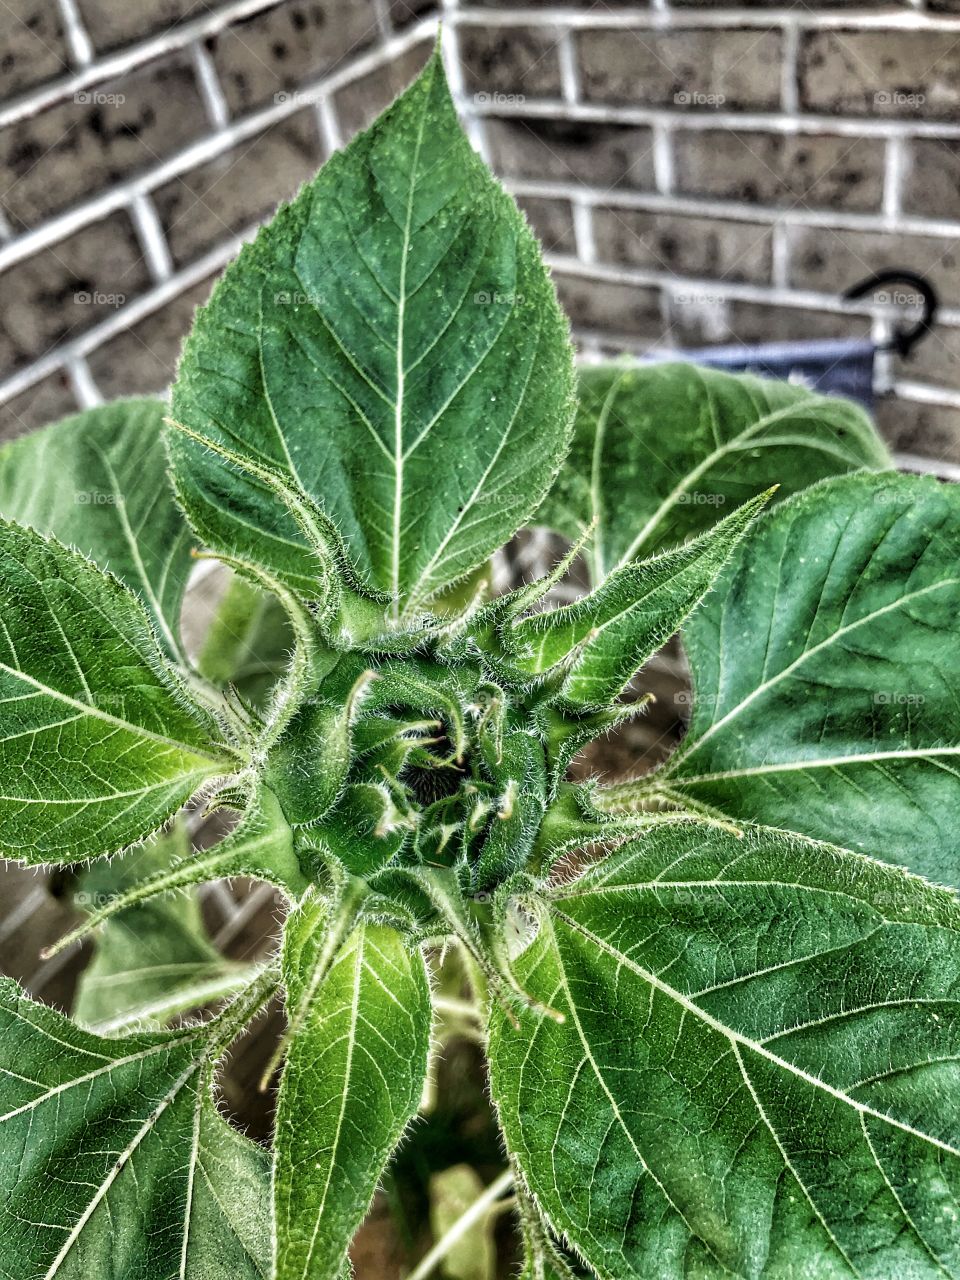 Sunflower almost ready to bloom 